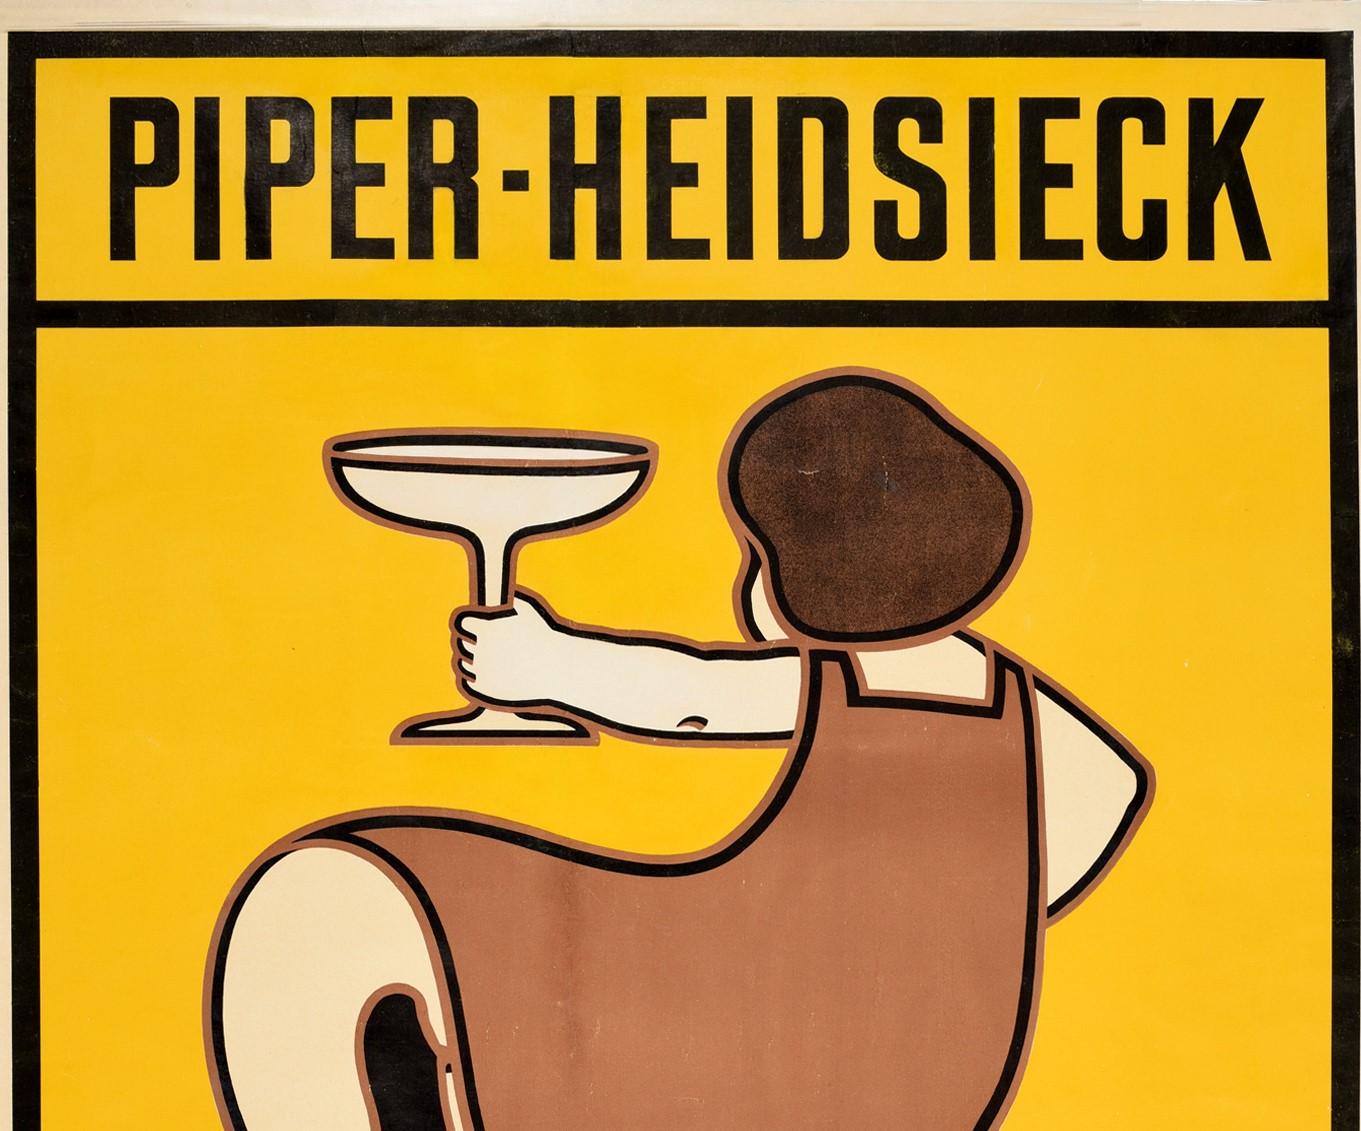 Original antique alcohol drink advertising poster for Piper-Heidsieck Champagne featuring a great design of a lady holding a large glass of champagne against a yellow background with the bold lettering above and below the framed margin lines. Piper